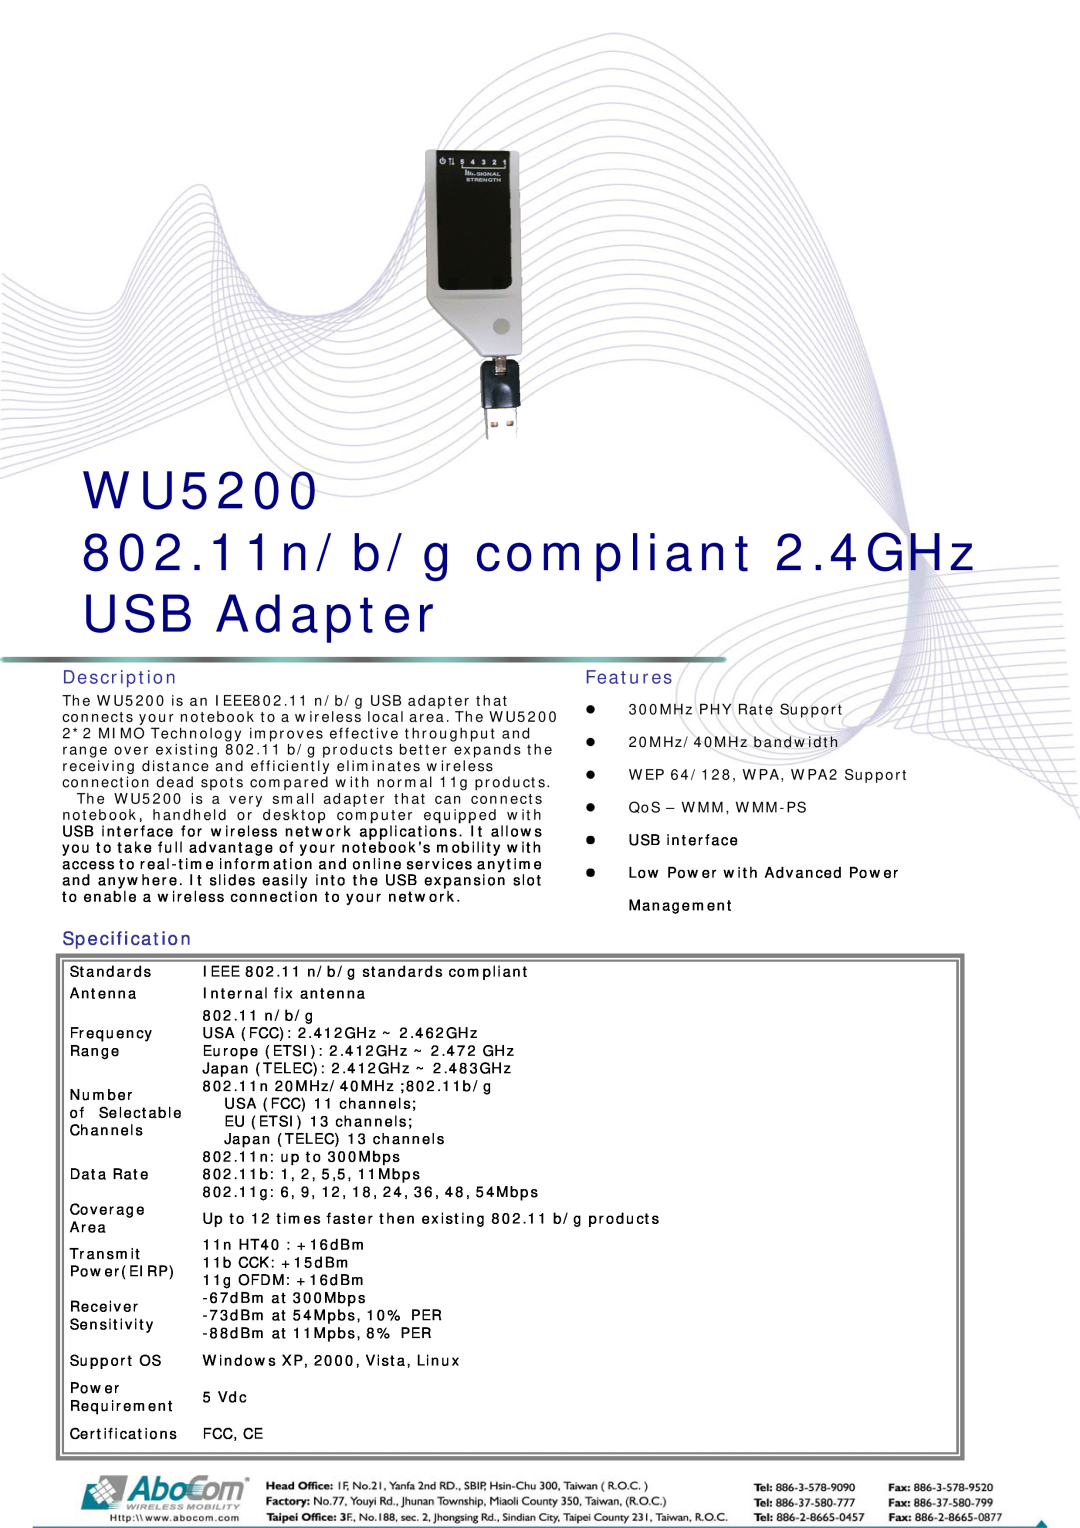 Abocom specifications WU5200 802.11n/b/g compliant 2.4GHz USB Adapter, Description, Features, Specification 